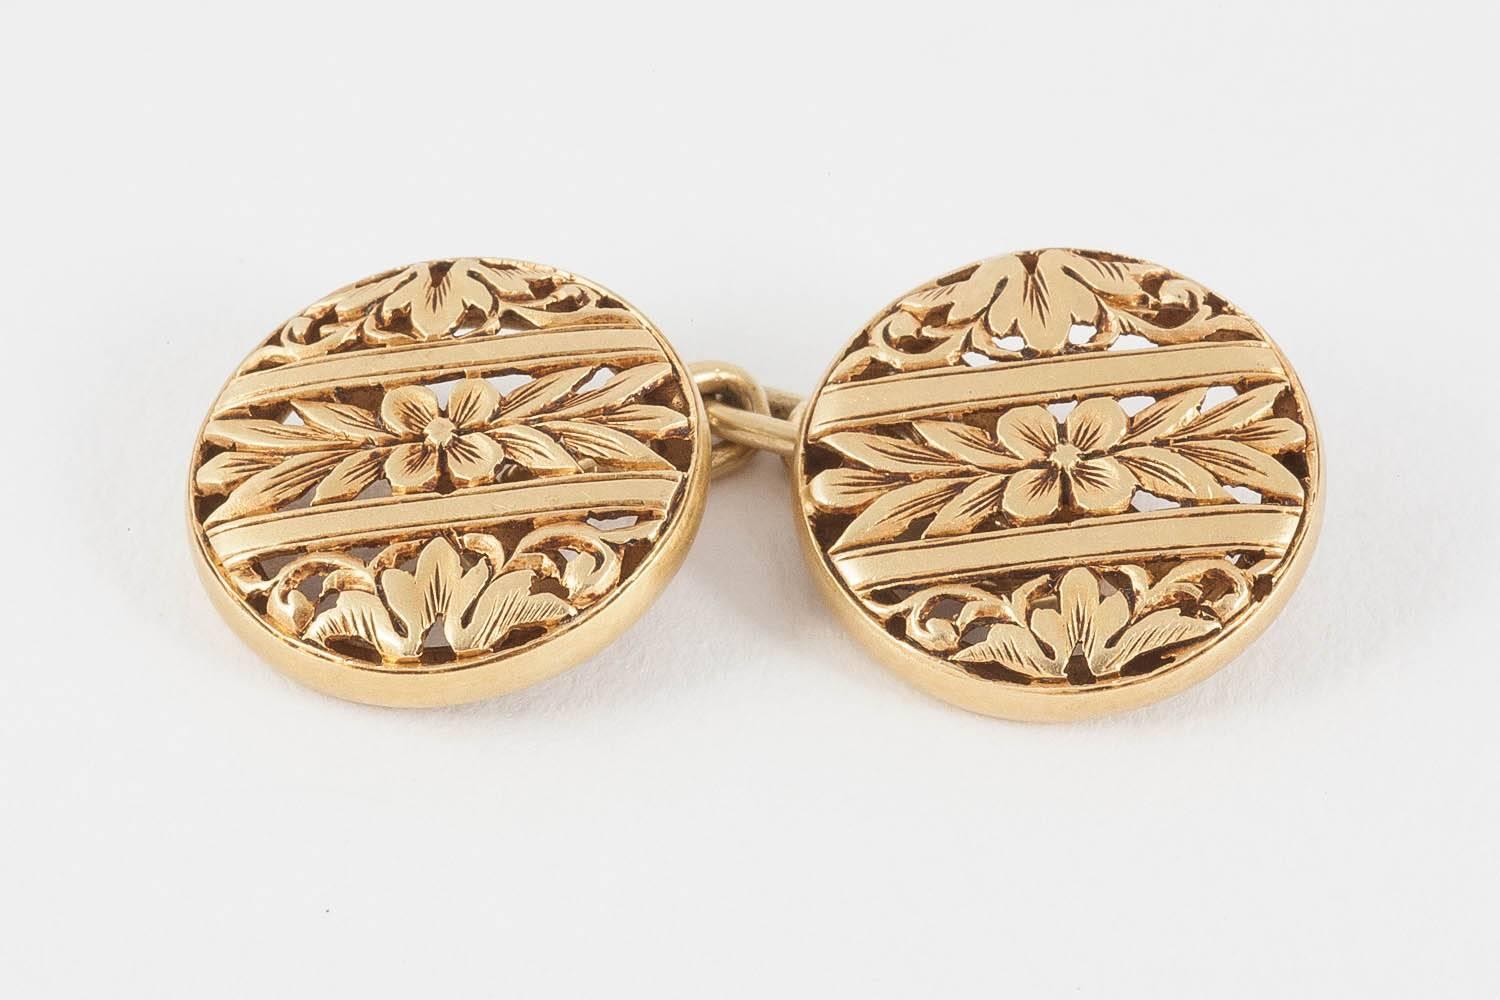 Antique cufflinks in 18 karat yellow gold. Double sided of openwork floral design with chain connections. The gold has a particular soft patina. In the Art Nouveau style. French marks.
Measures 12mm across.
Antique (over 100 years old).
Late 19th